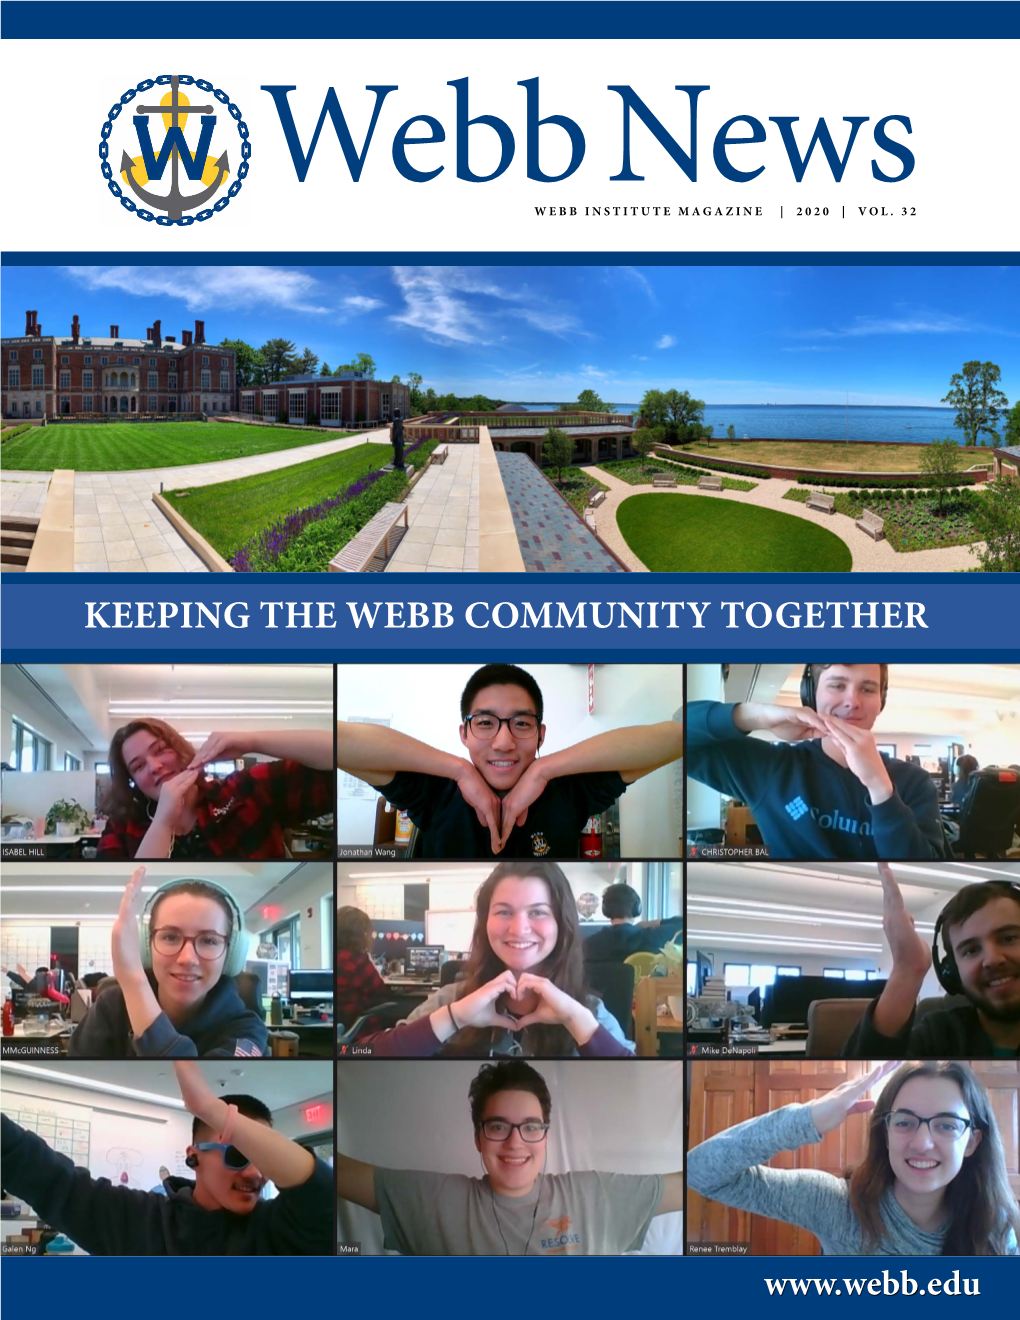 Keeping the Webb Community Together